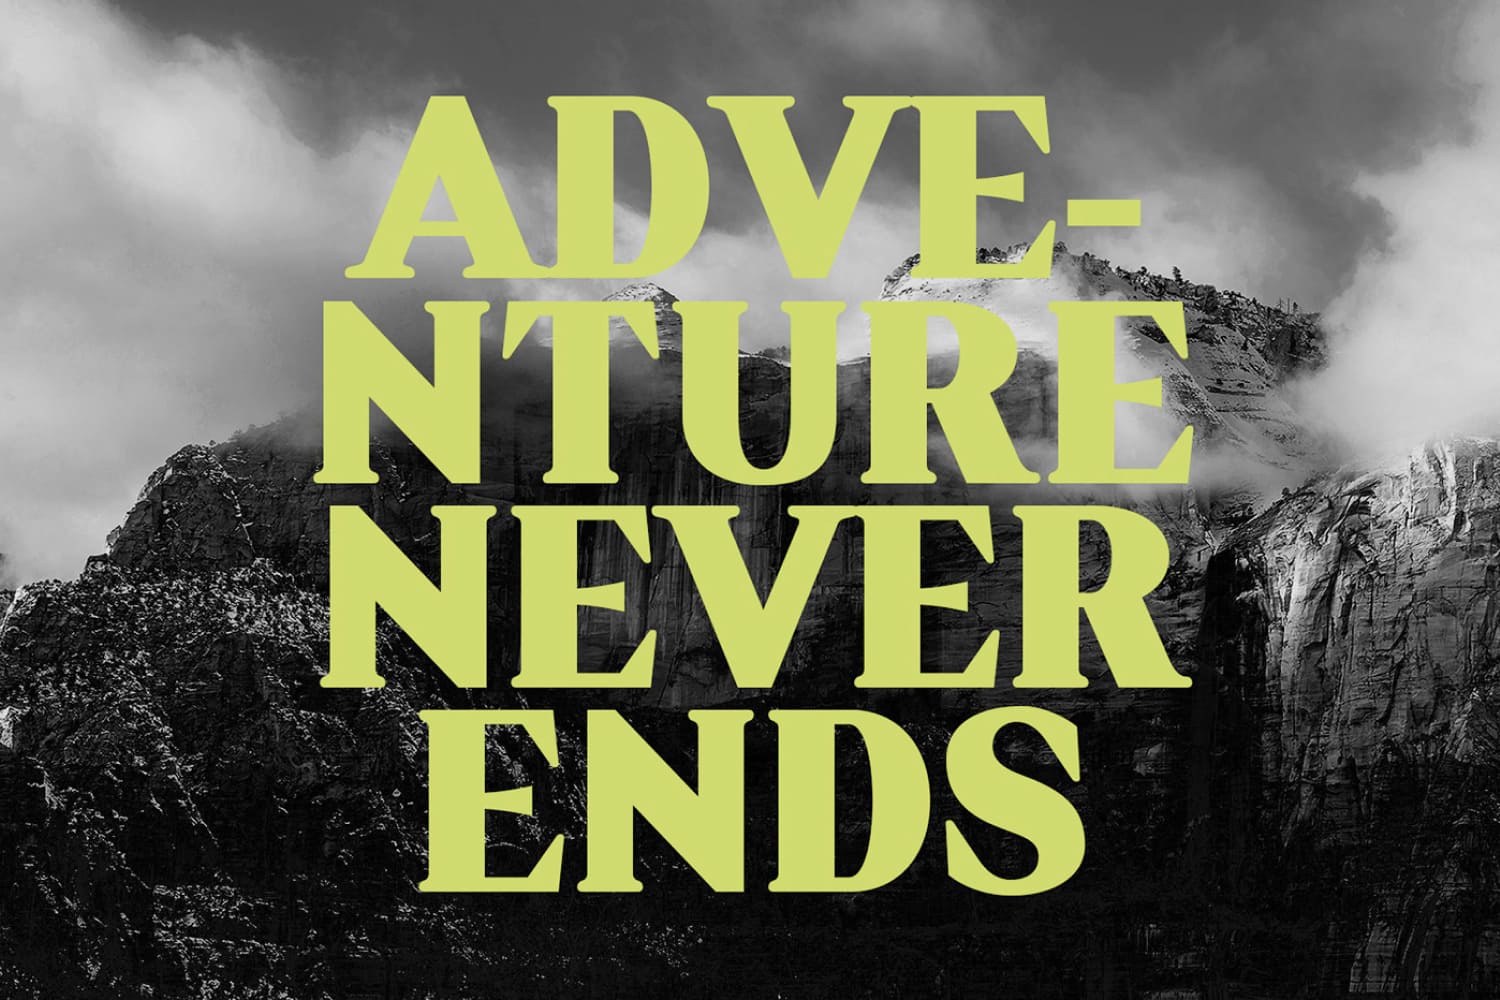 Large yellow text against a black and white photo of mountains.